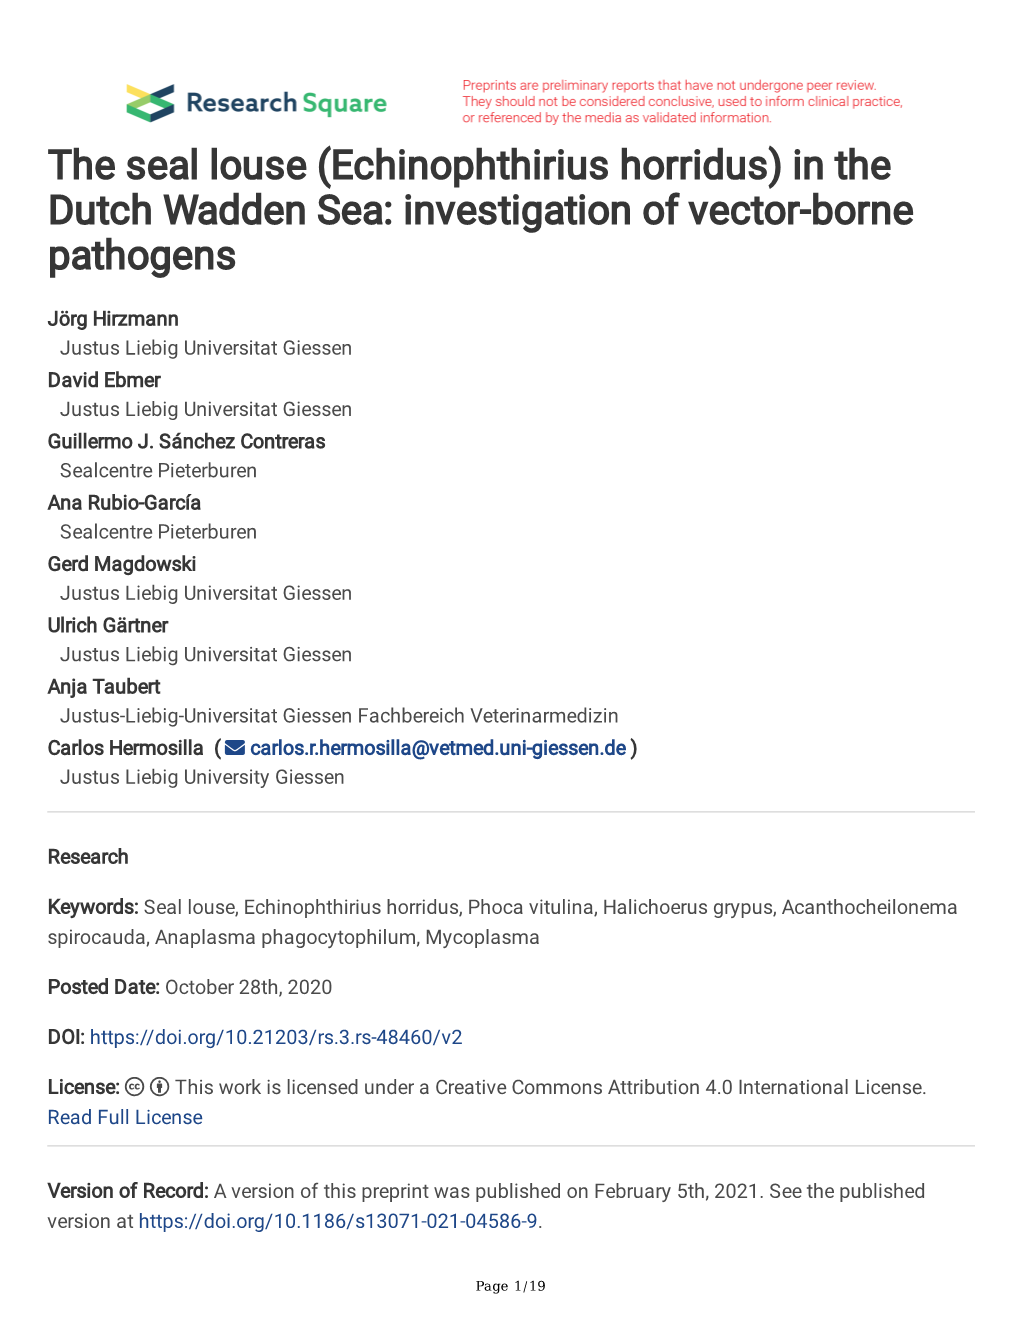 The Seal Louse (Echinophthirius Horridus) in the Dutch Wadden Sea: Investigation of Vector-Borne Pathogens